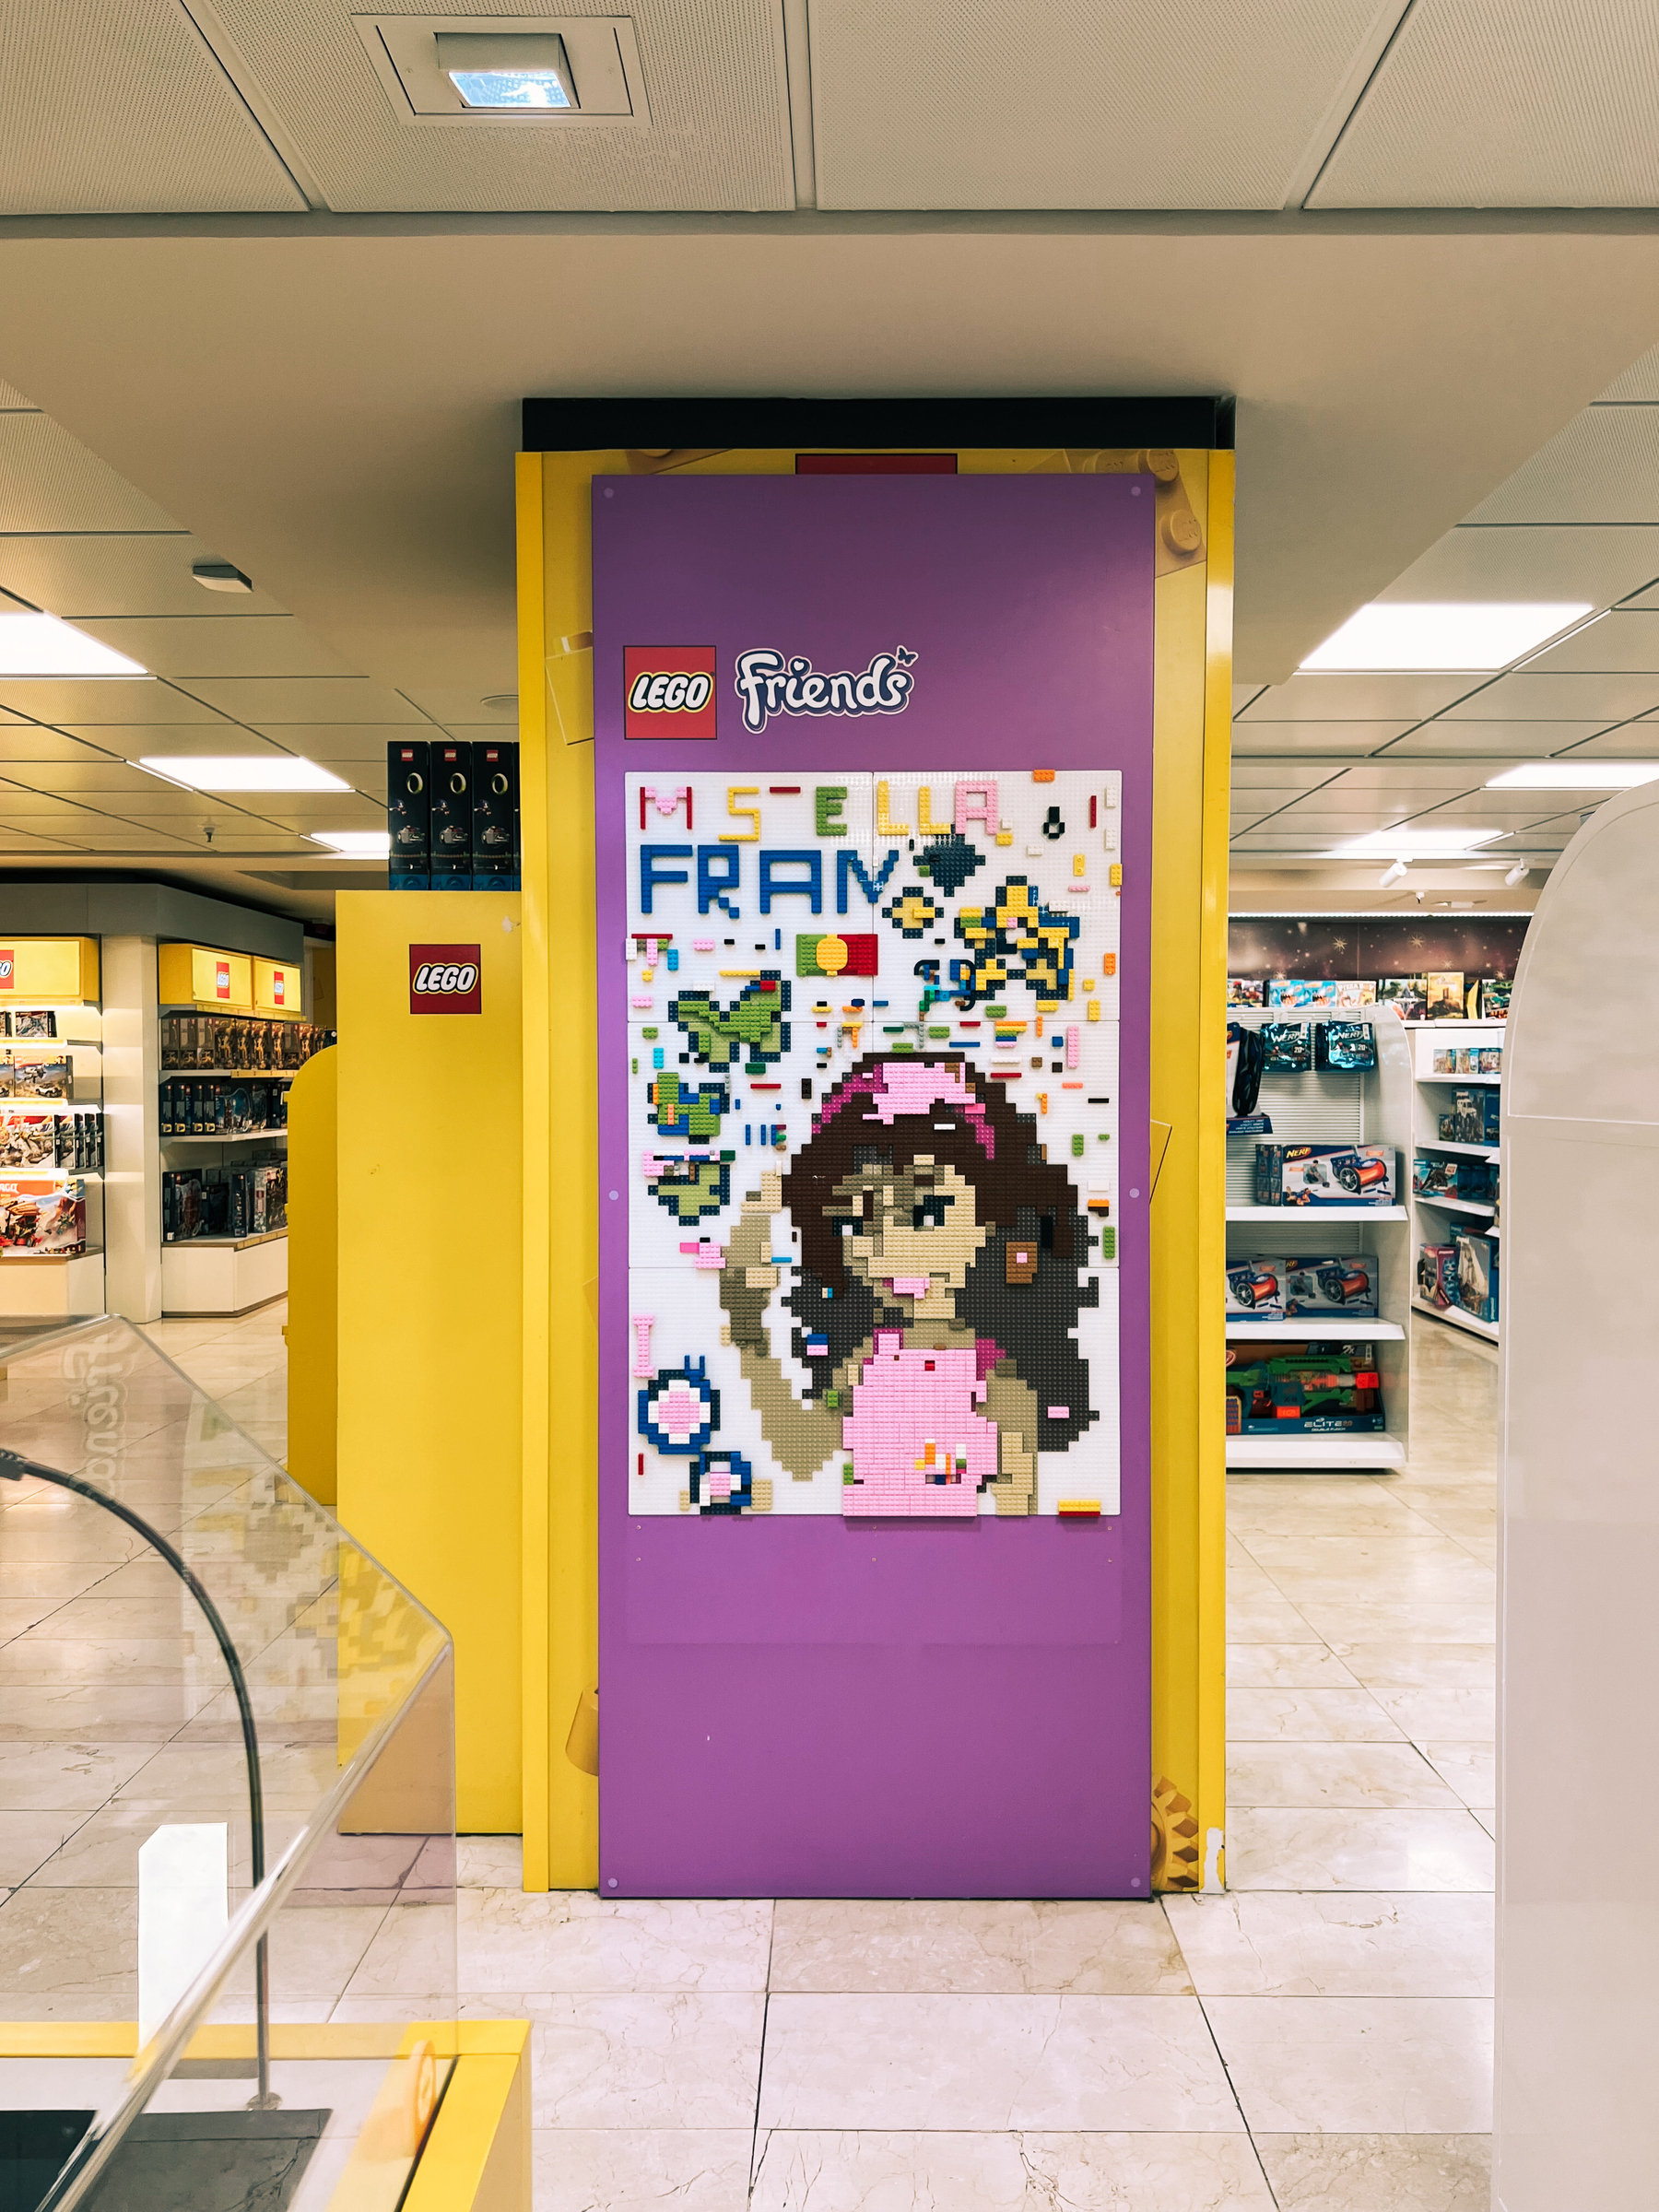 A colorful LEGO store entrance with a purple door featuring a LEGO Friends mosaic of a girl, and shelves with LEGO boxes in the background.